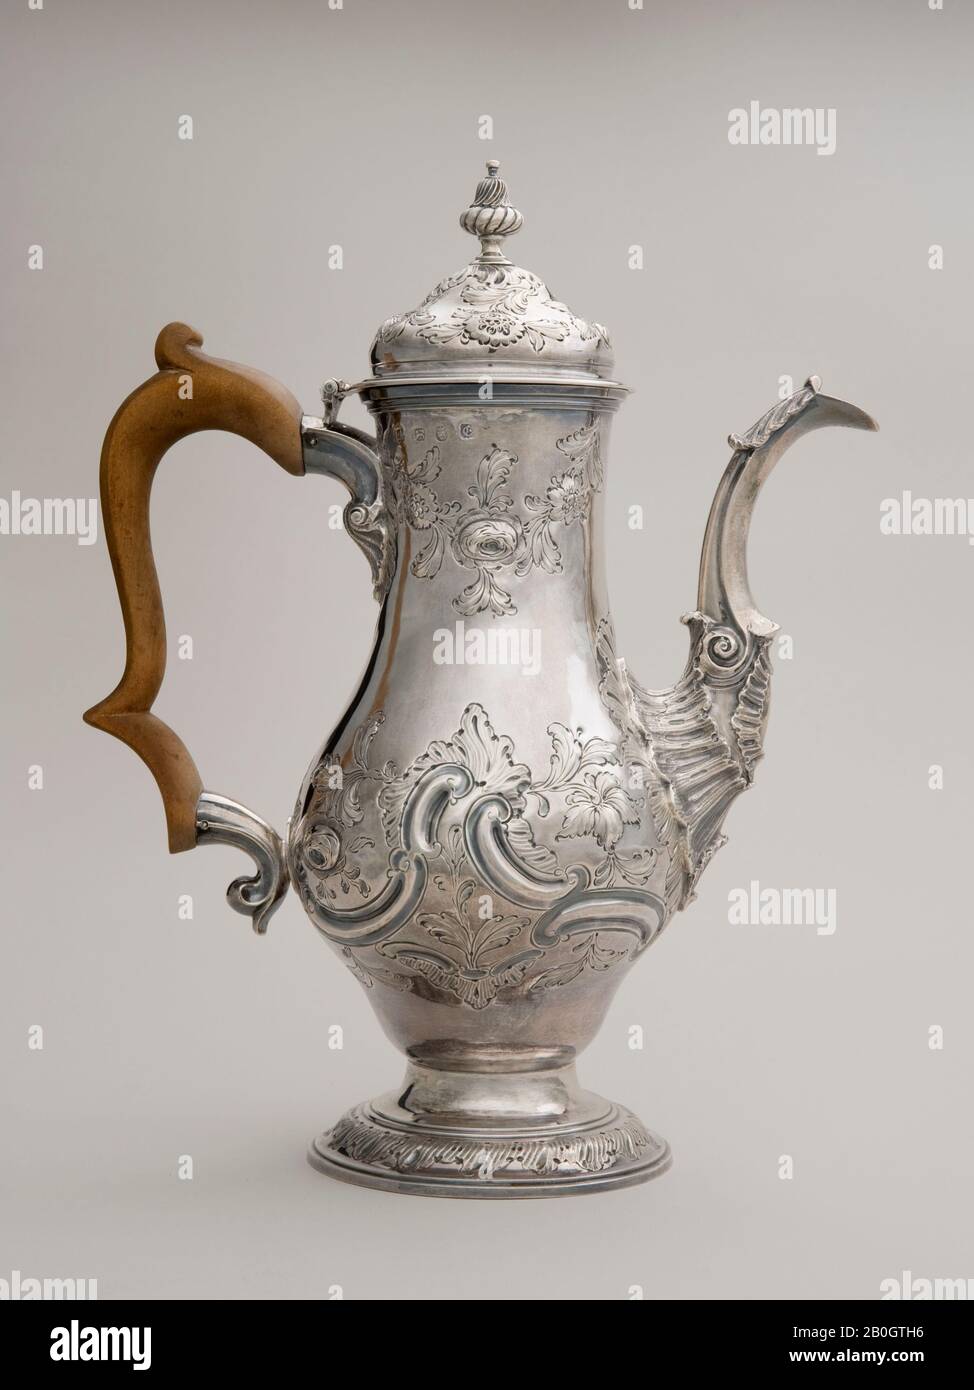 Arthur Annesley, English, mark entered 1758, Coffeepot, 1760/61, Silver and wood, base: 4 5/8 in. (11.7 cm Stock Photo